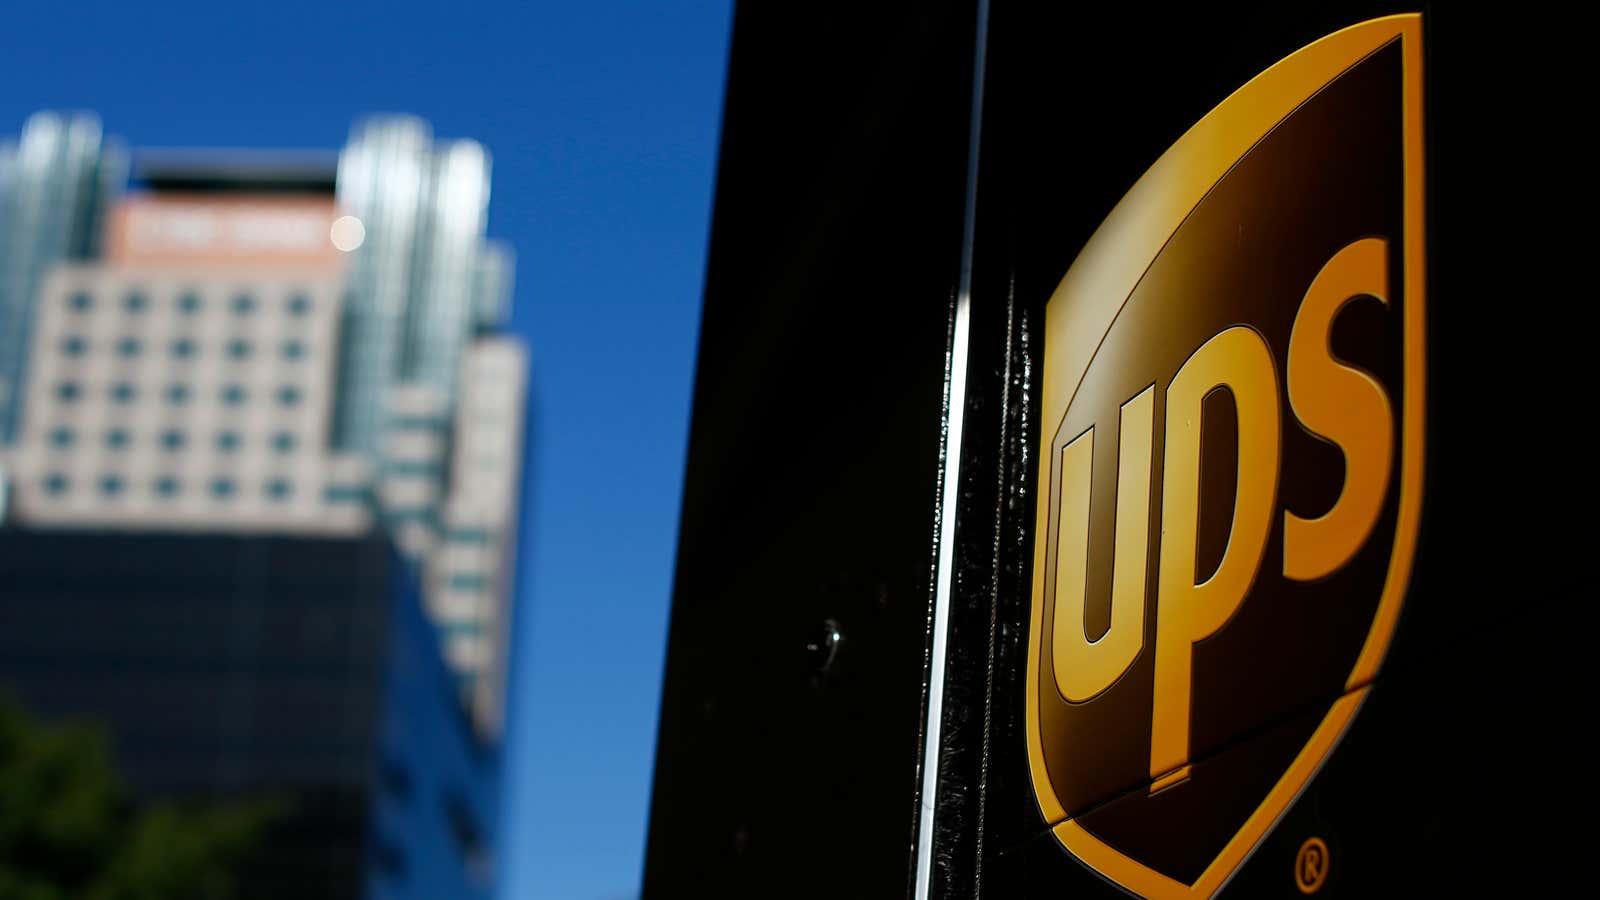 UPS drivers are collapsing from heat exhaustion—and bringing it to the bargaining table